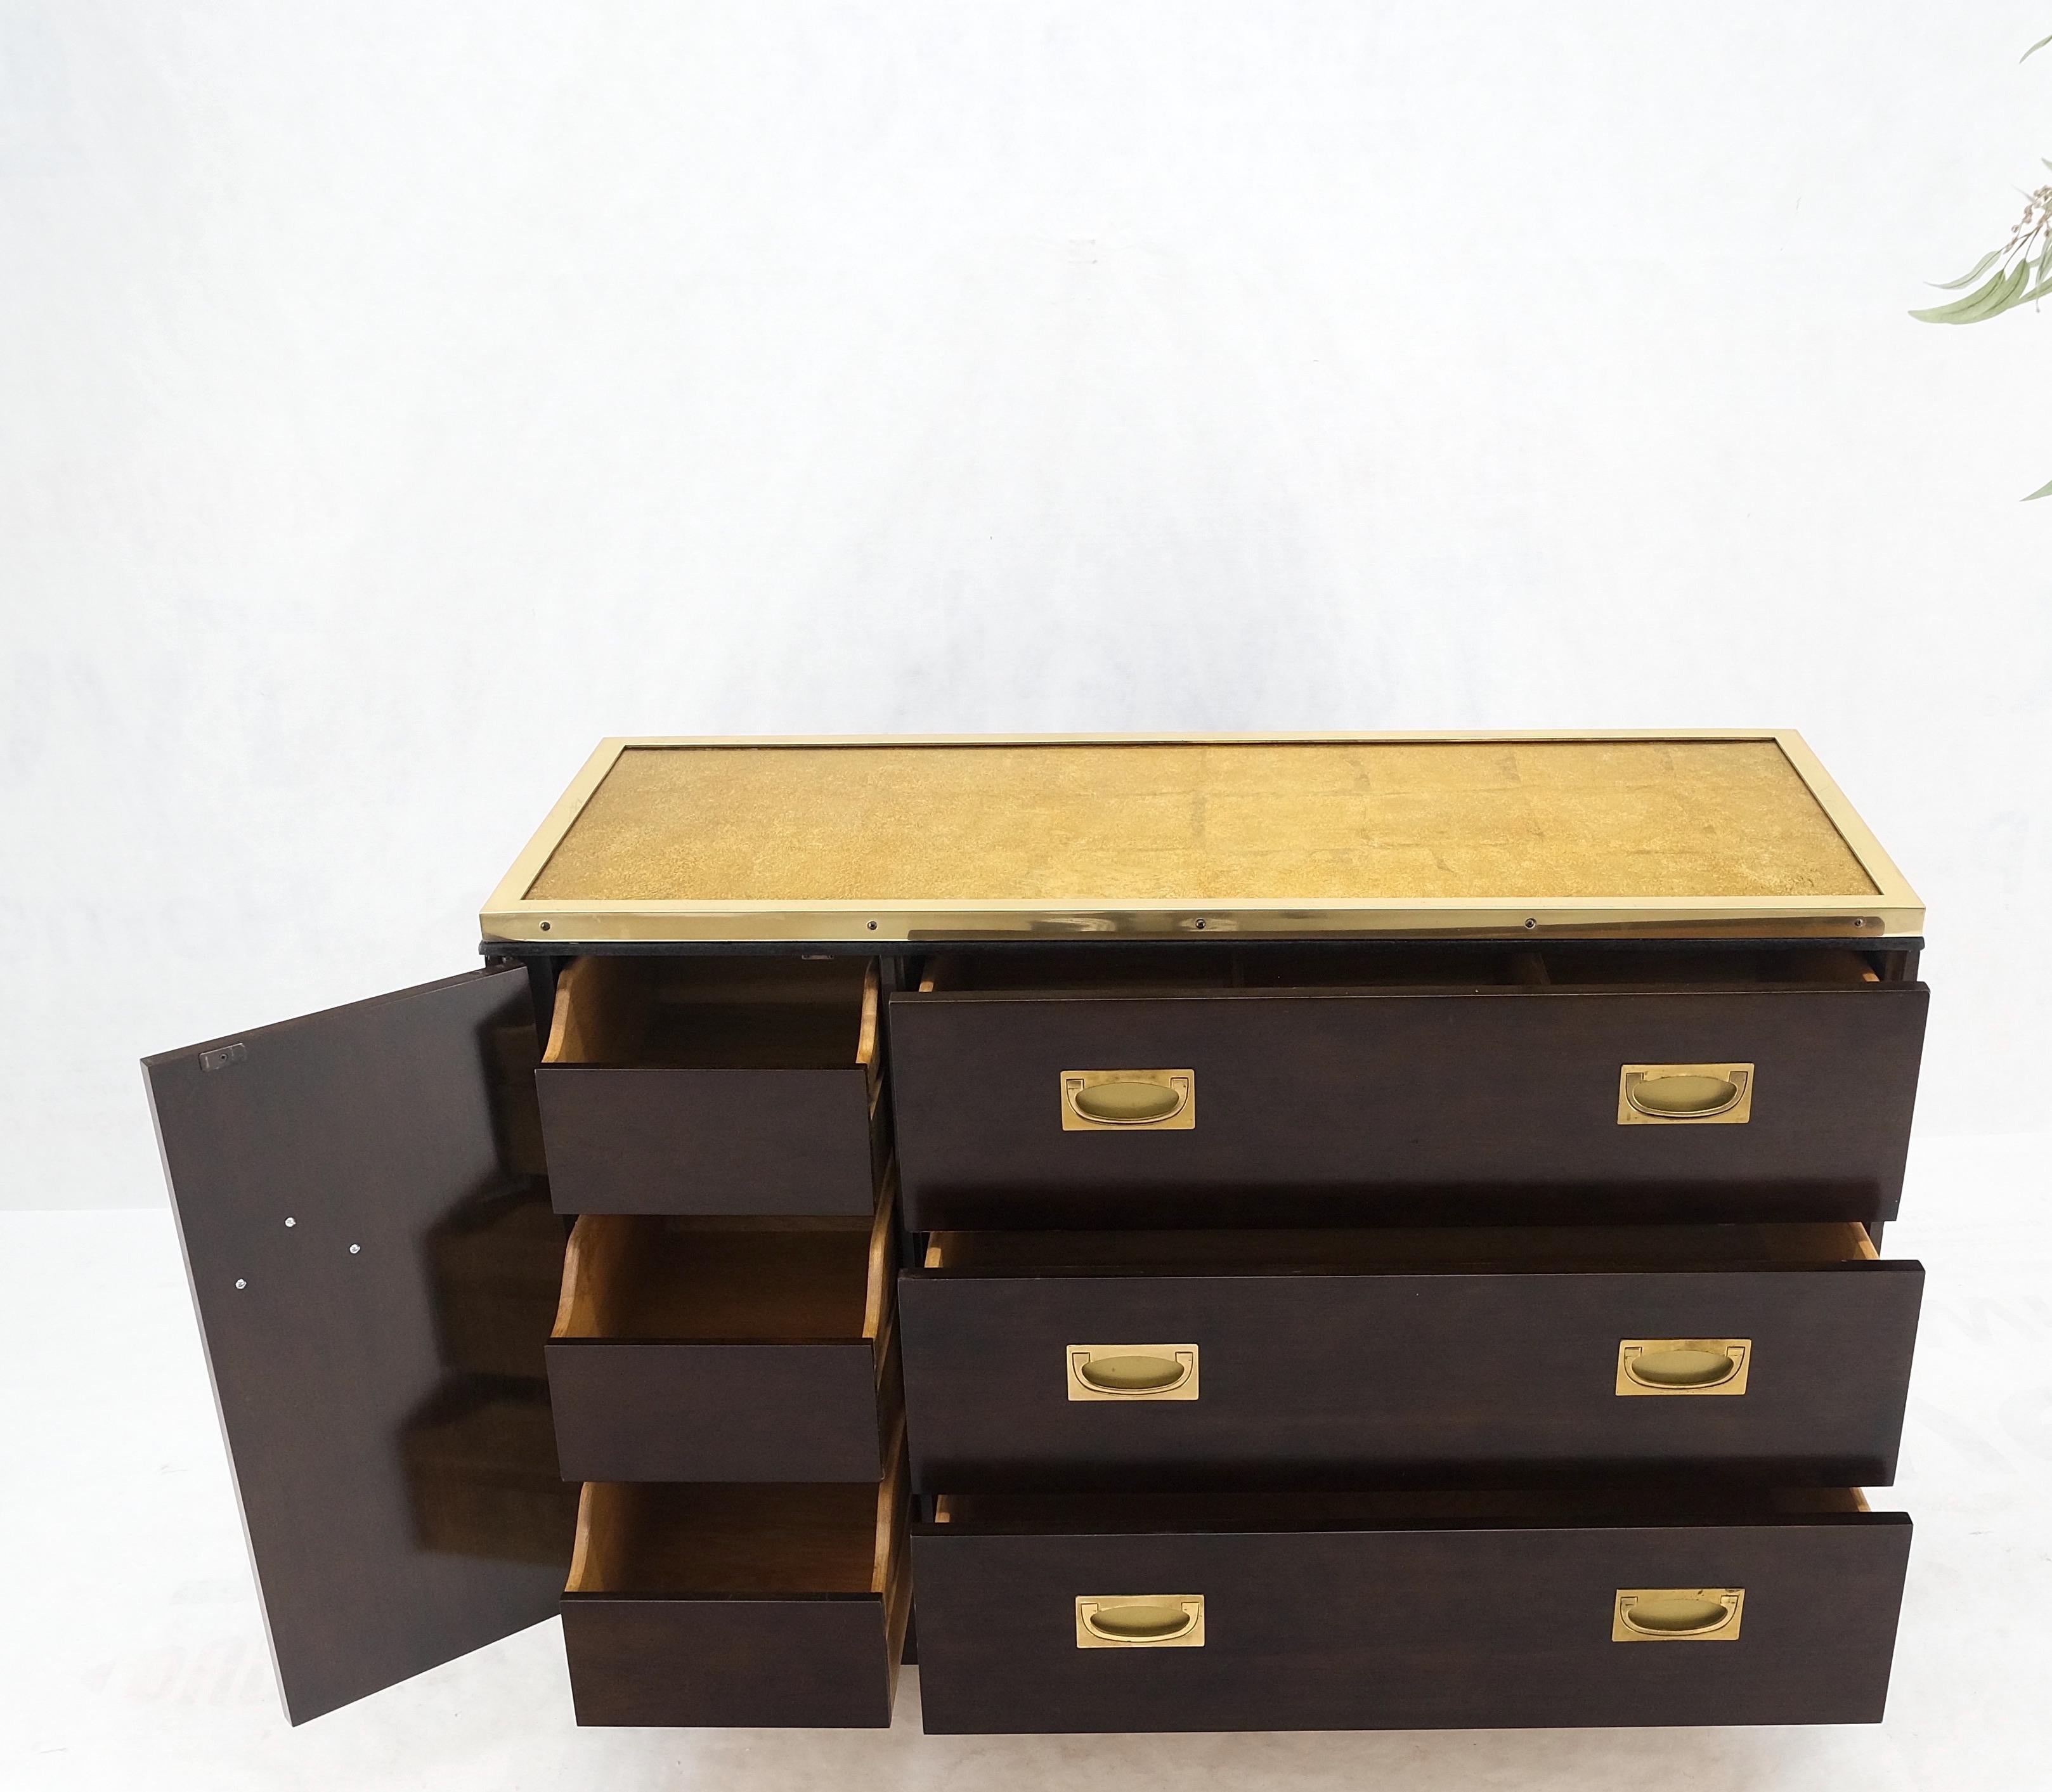 Campaign Style 6 Drawers Brass Drop Pulls Mid-Century Modern Bachelor Chest Mint For Sale 6